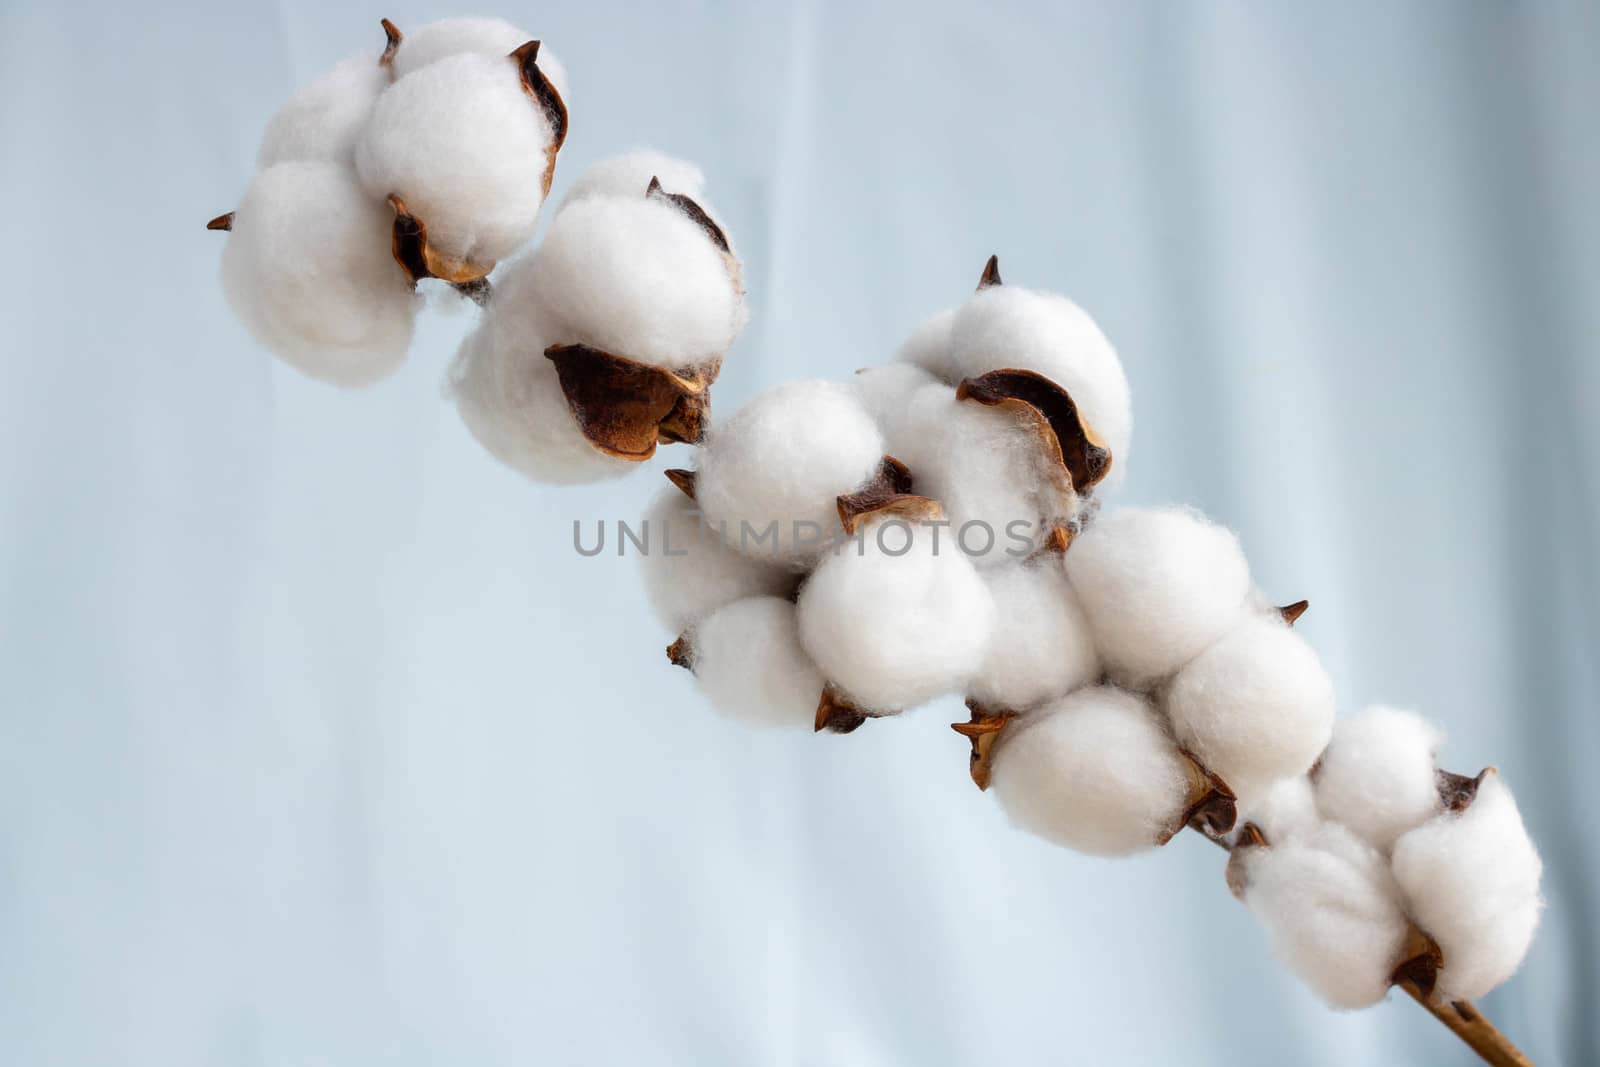 A sprig of cotton on a soft blue fabric.